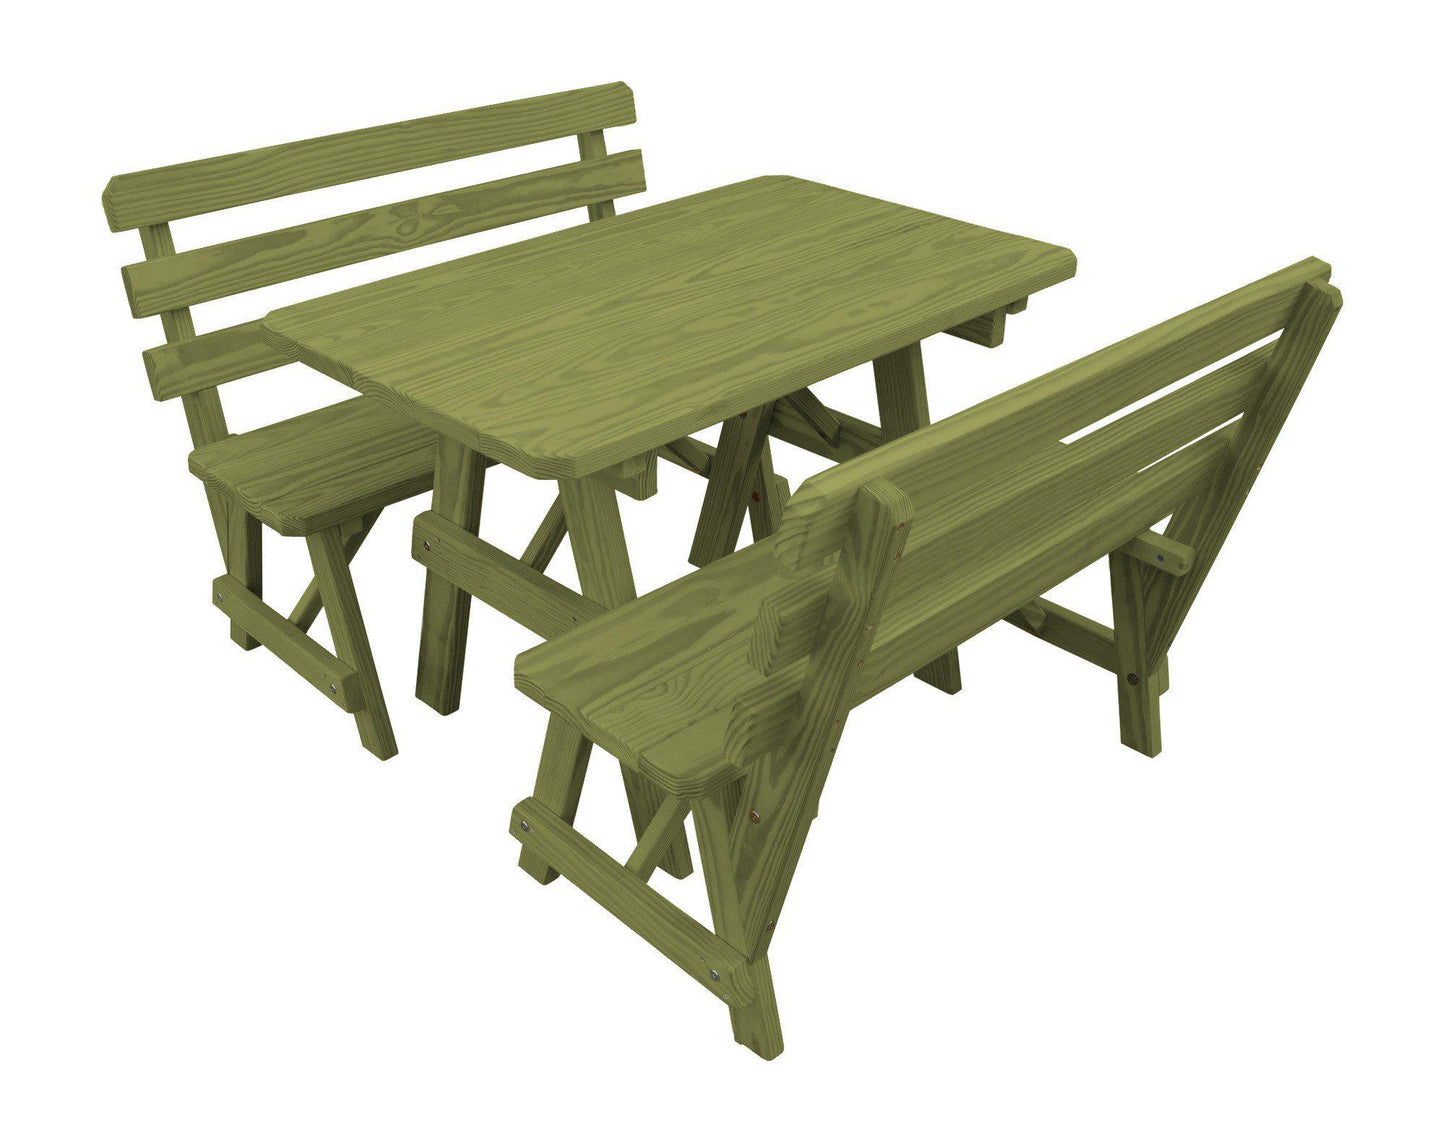 A&L Furniture Co. Yellow Pine 4' Table w/2 Backed Benches - LEAD TIME TO SHIP 10 BUSINESS DAYS